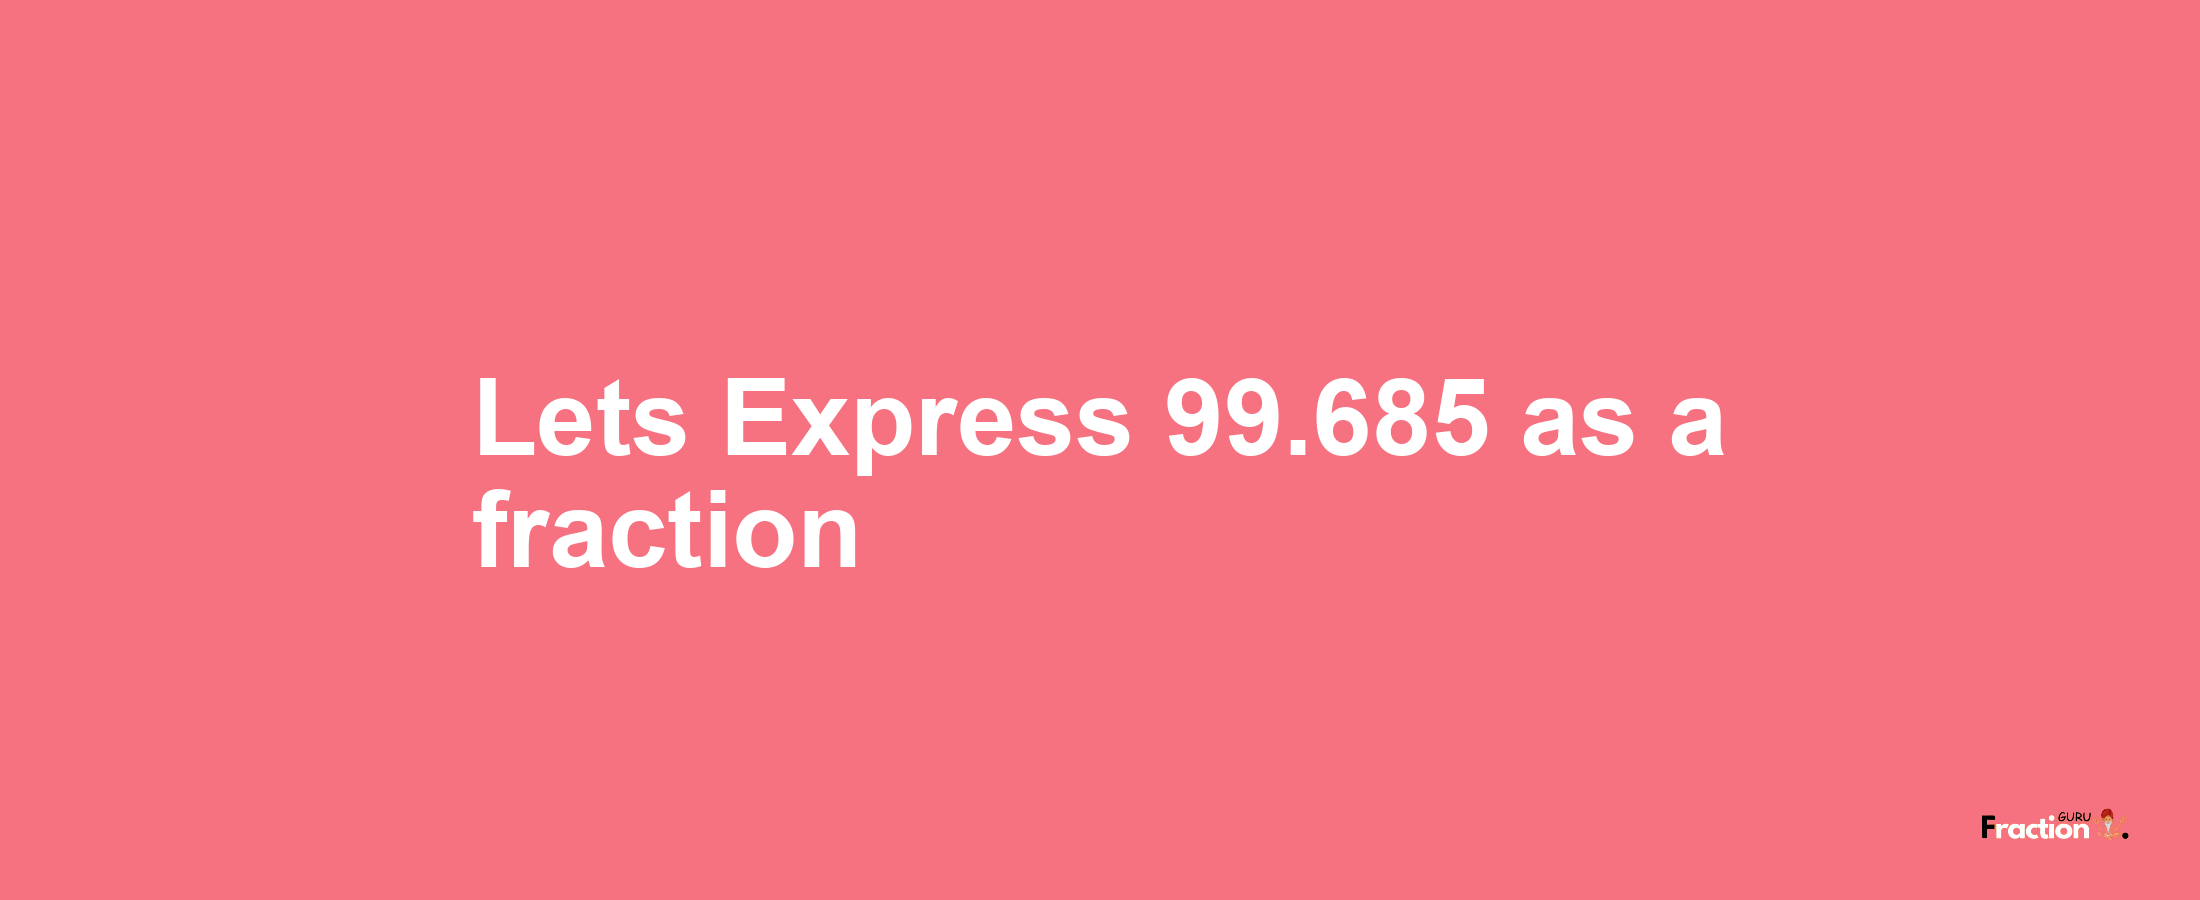 Lets Express 99.685 as afraction